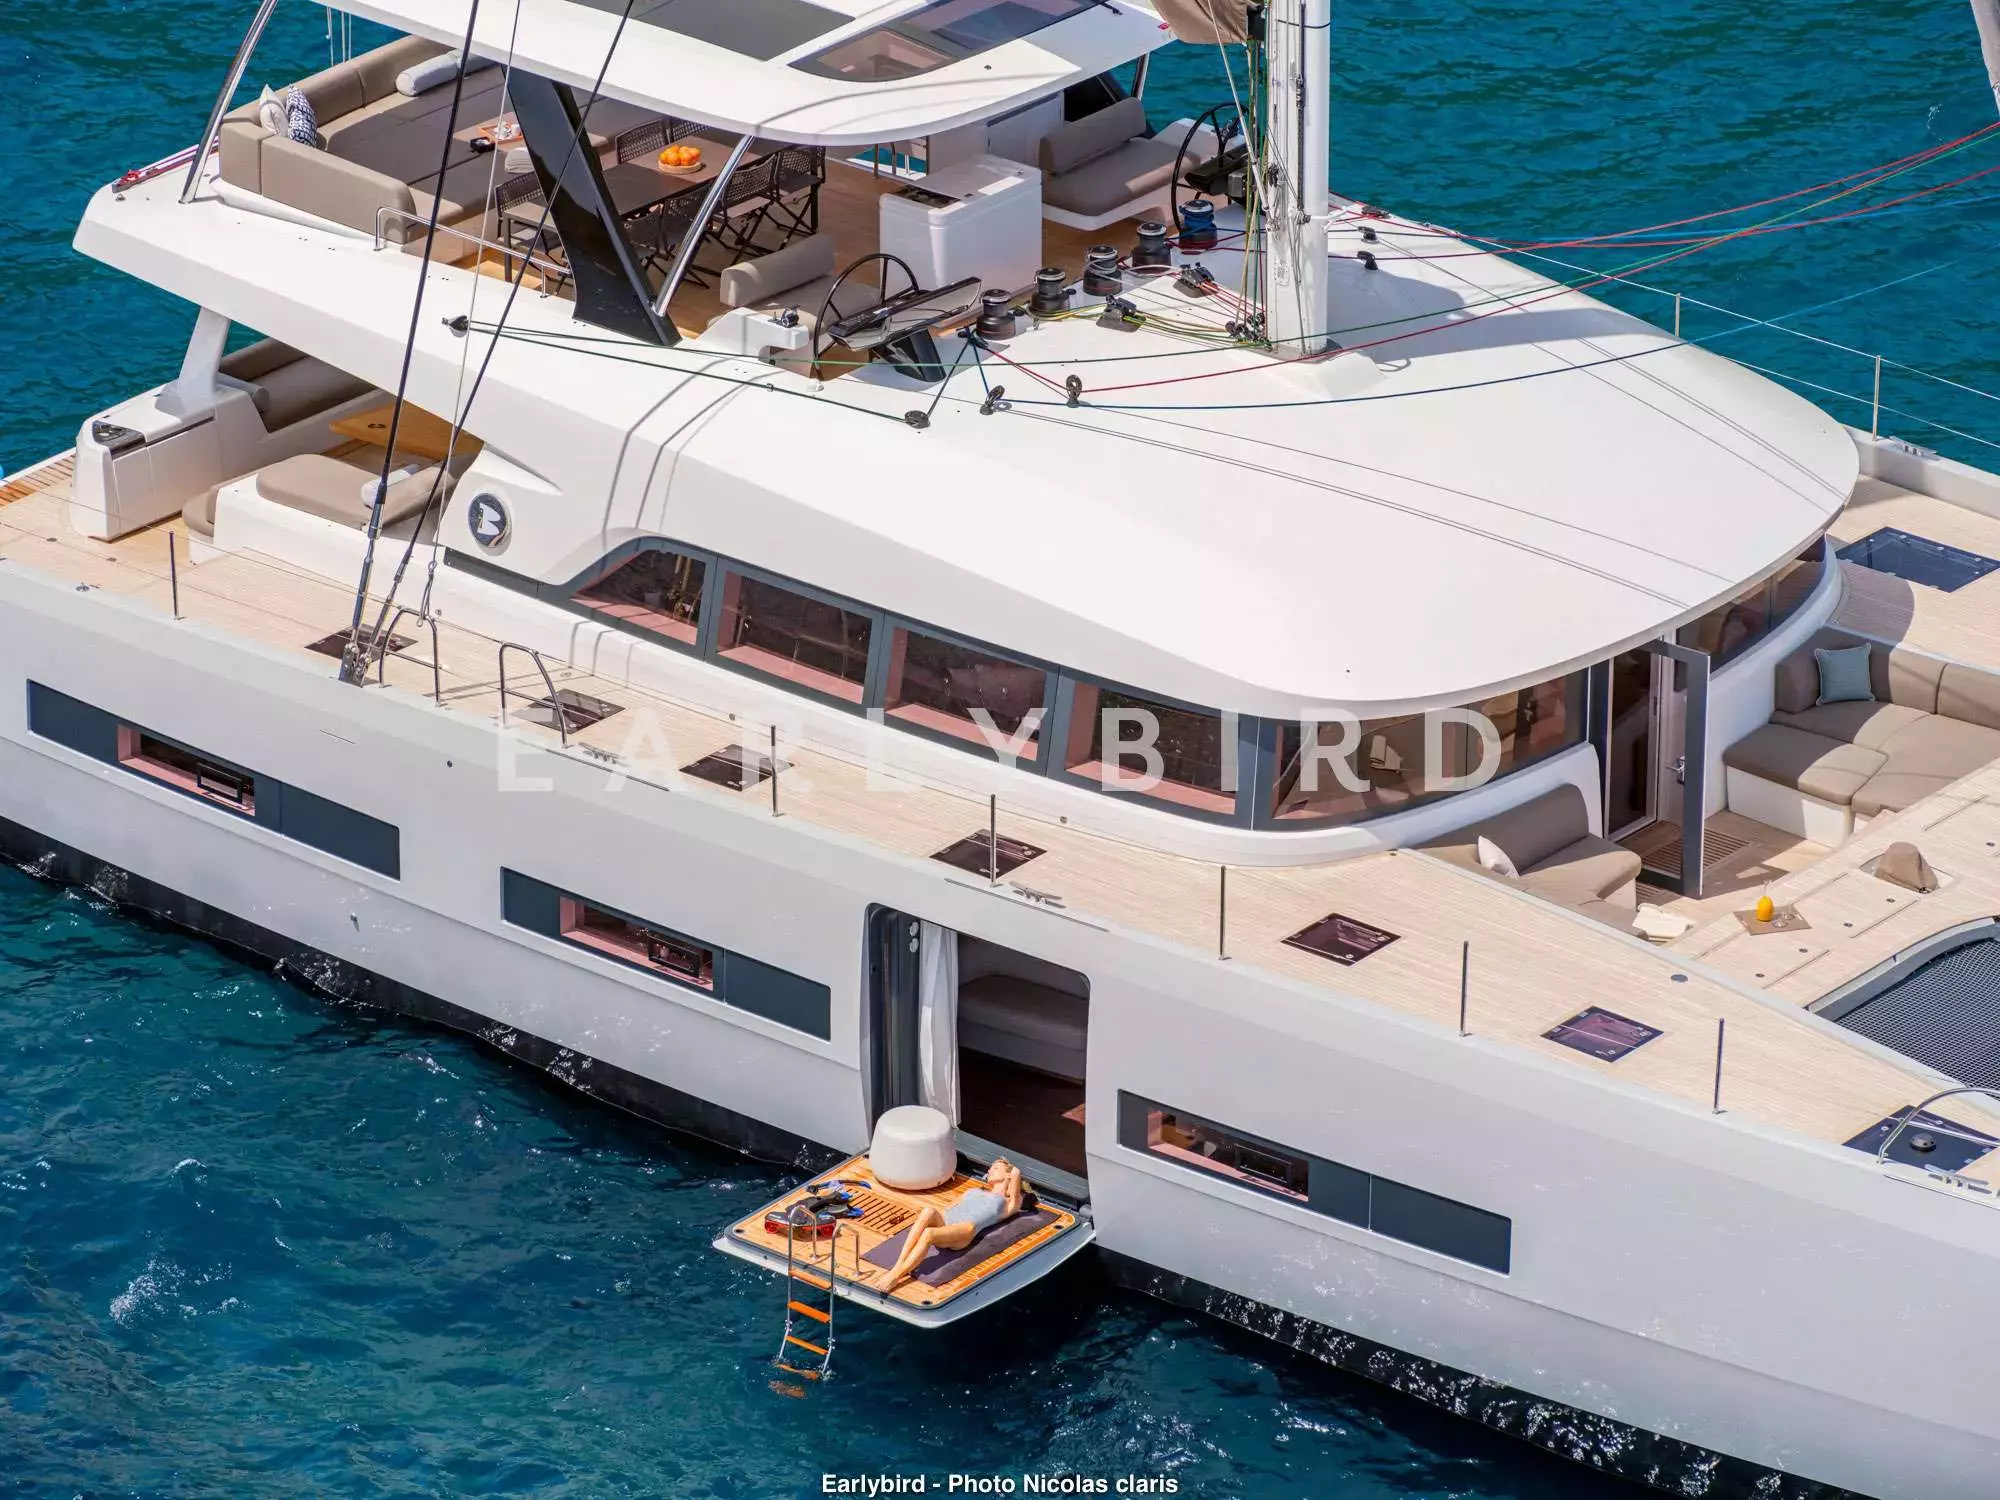 Earlybird by Lagoon - Special Offer for a private Luxury Catamaran Charter in St Vincent with a crew